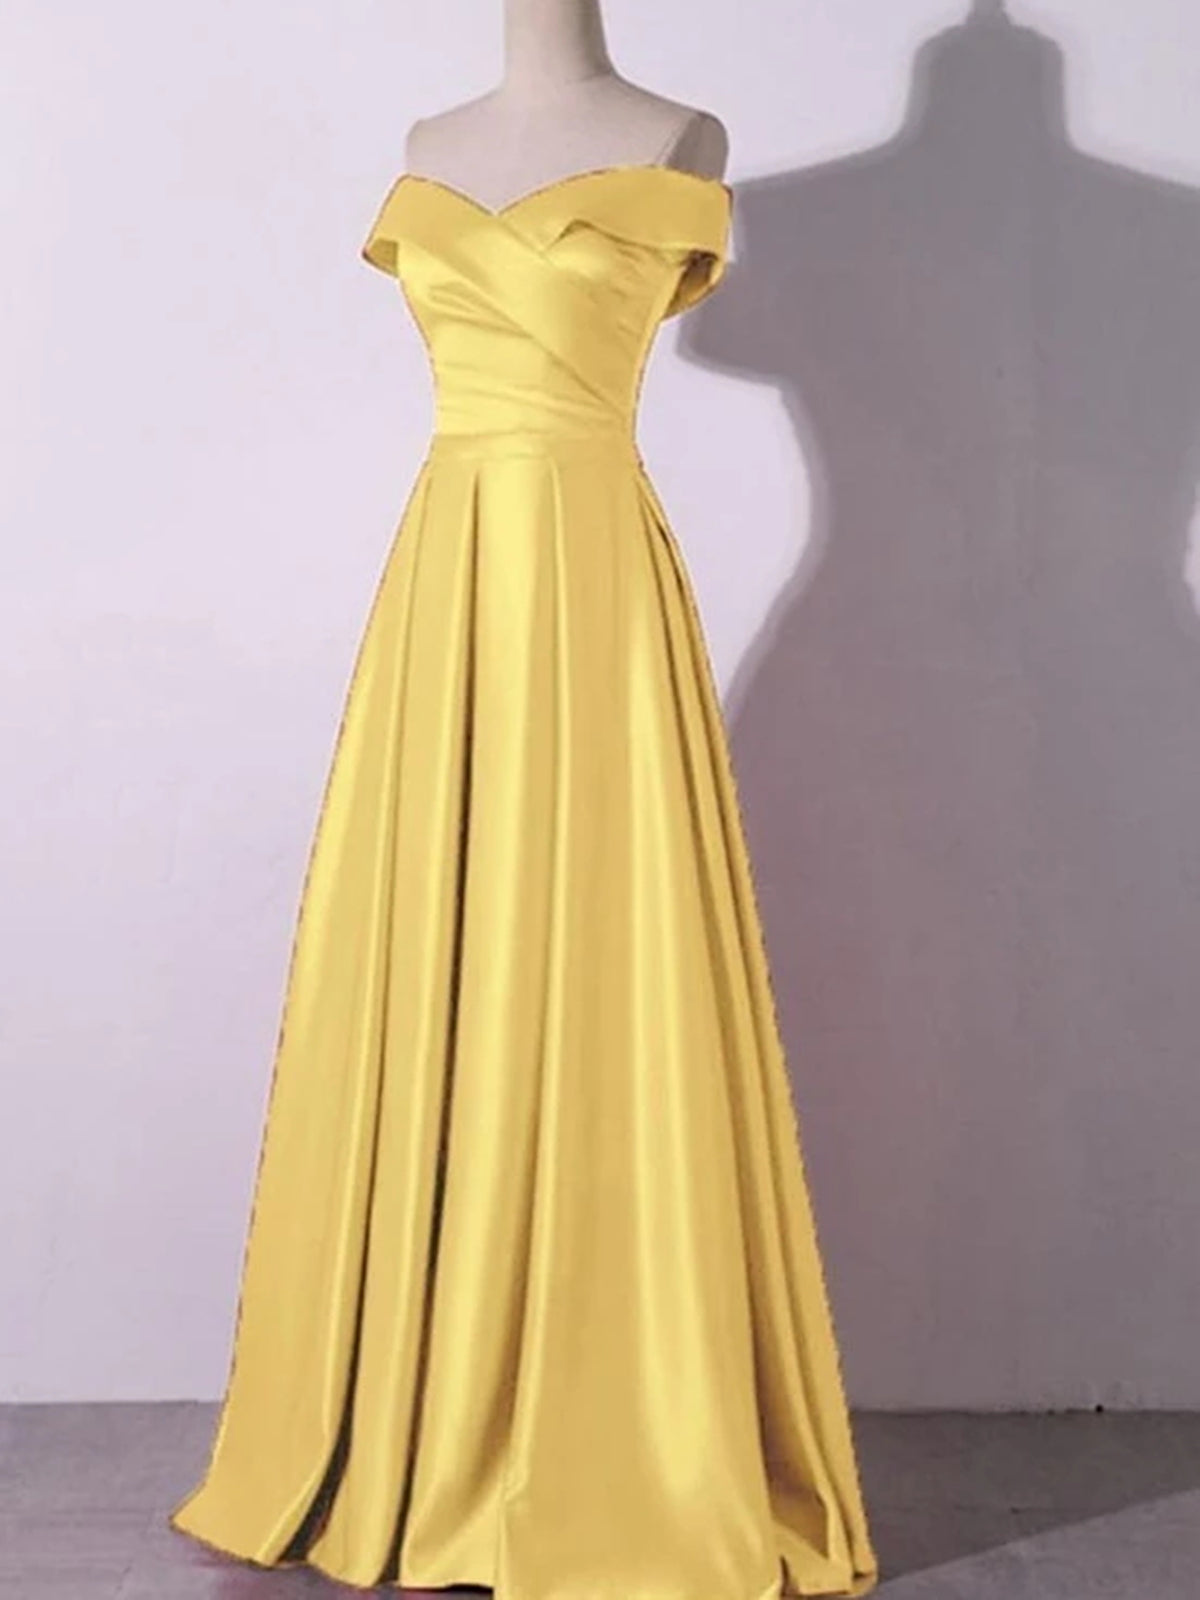 Off the Shoulder Yellow/Blue Satin Long Prom Dresses, Yellow/Blue Satin Formal Bridesmaid Dresses